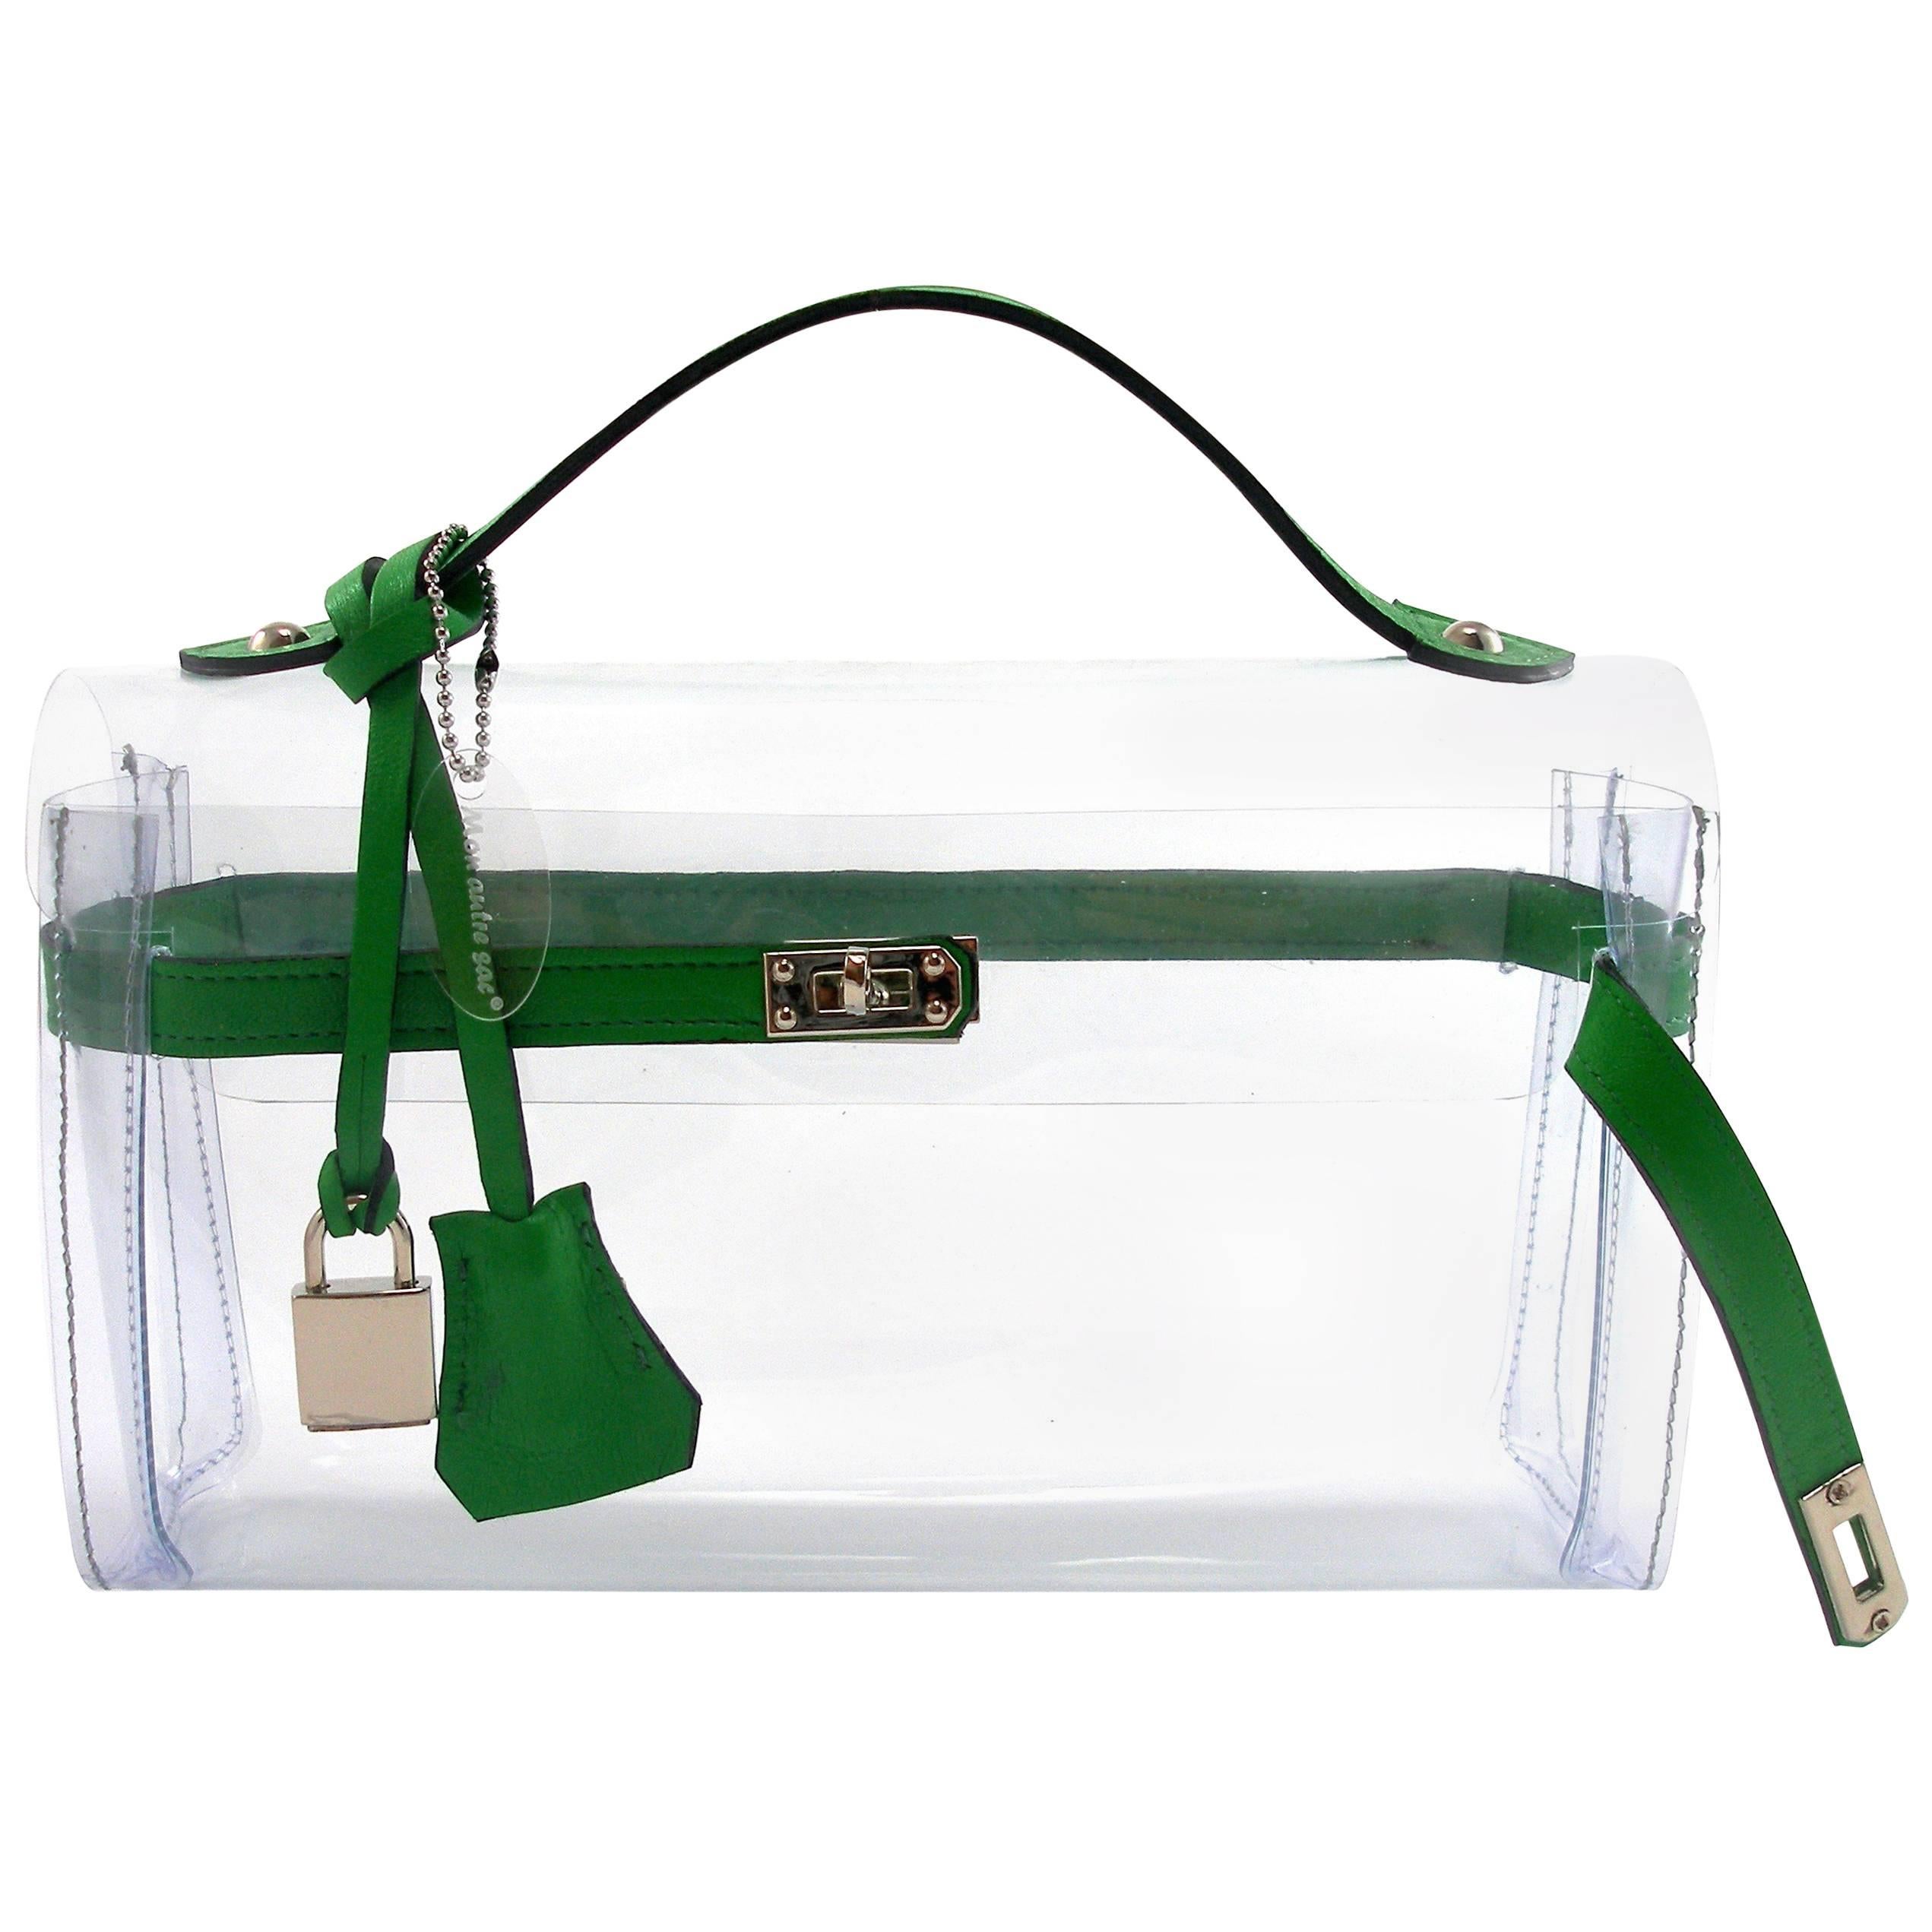 ORIGINAL Mon Autre Sac ® Clutch Crystal Pvc and Green leather / Brand New 